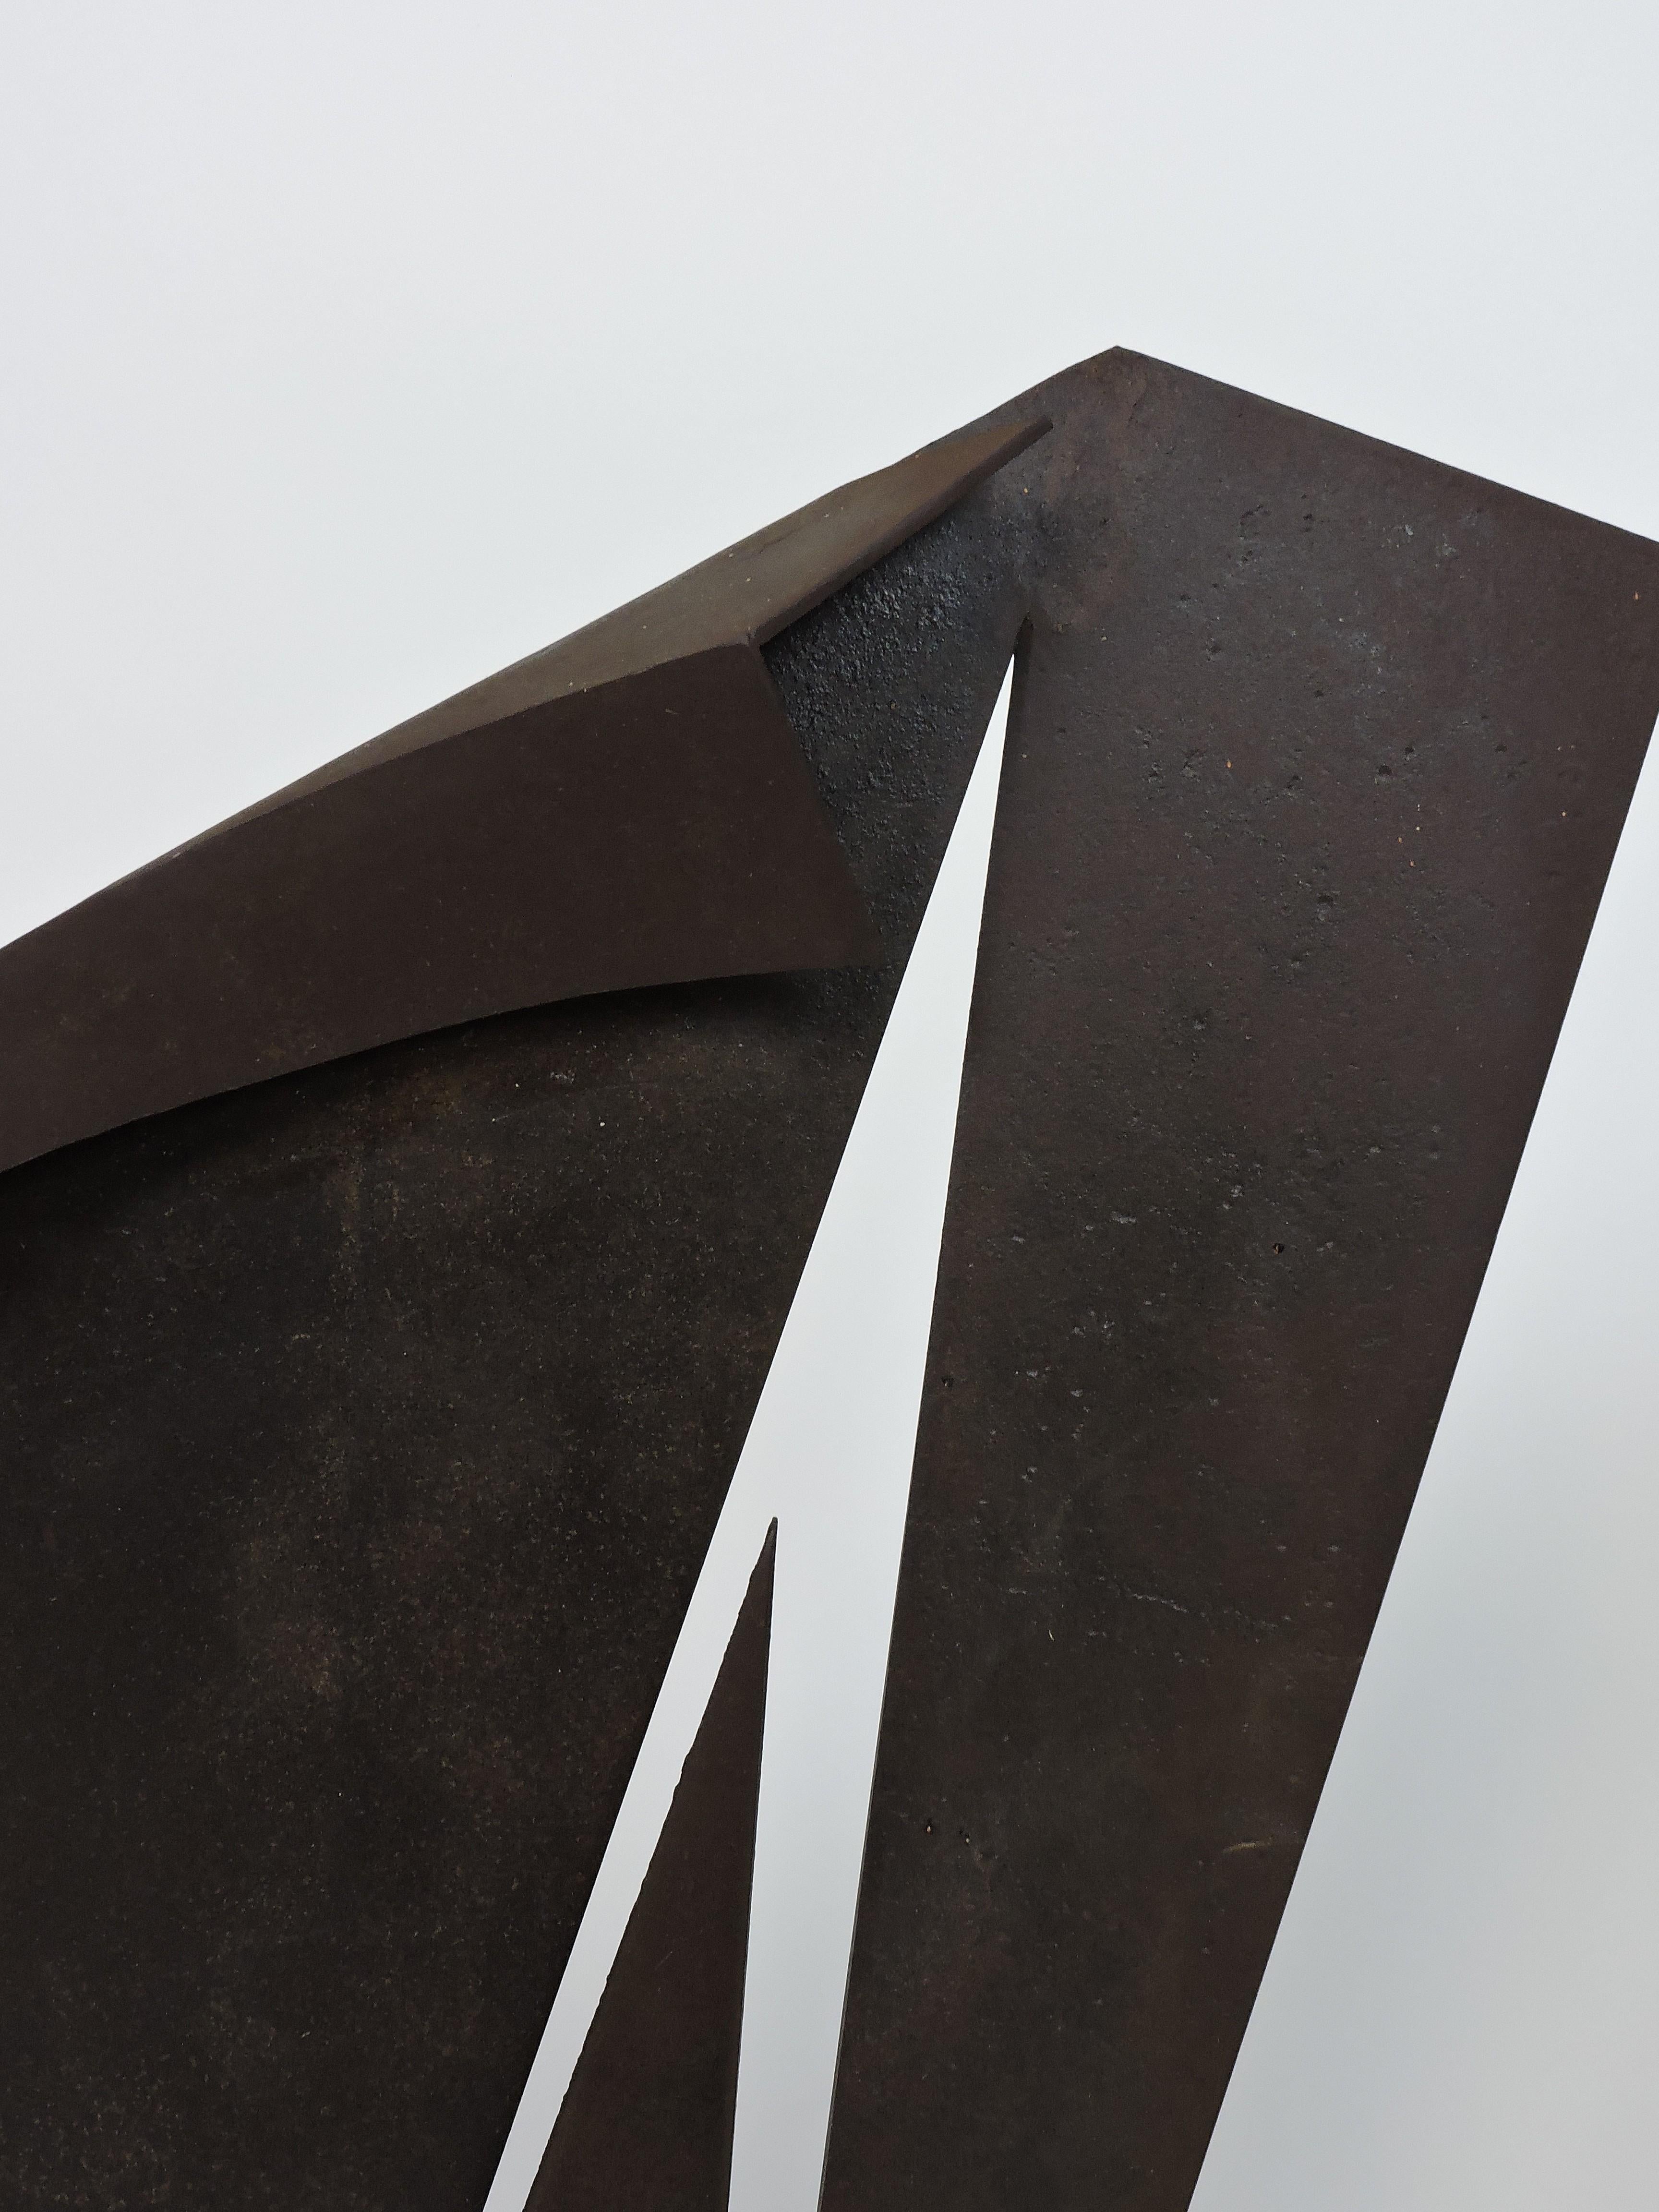 American Abstract Welded Geometric Steel Sculpture by David Tothero